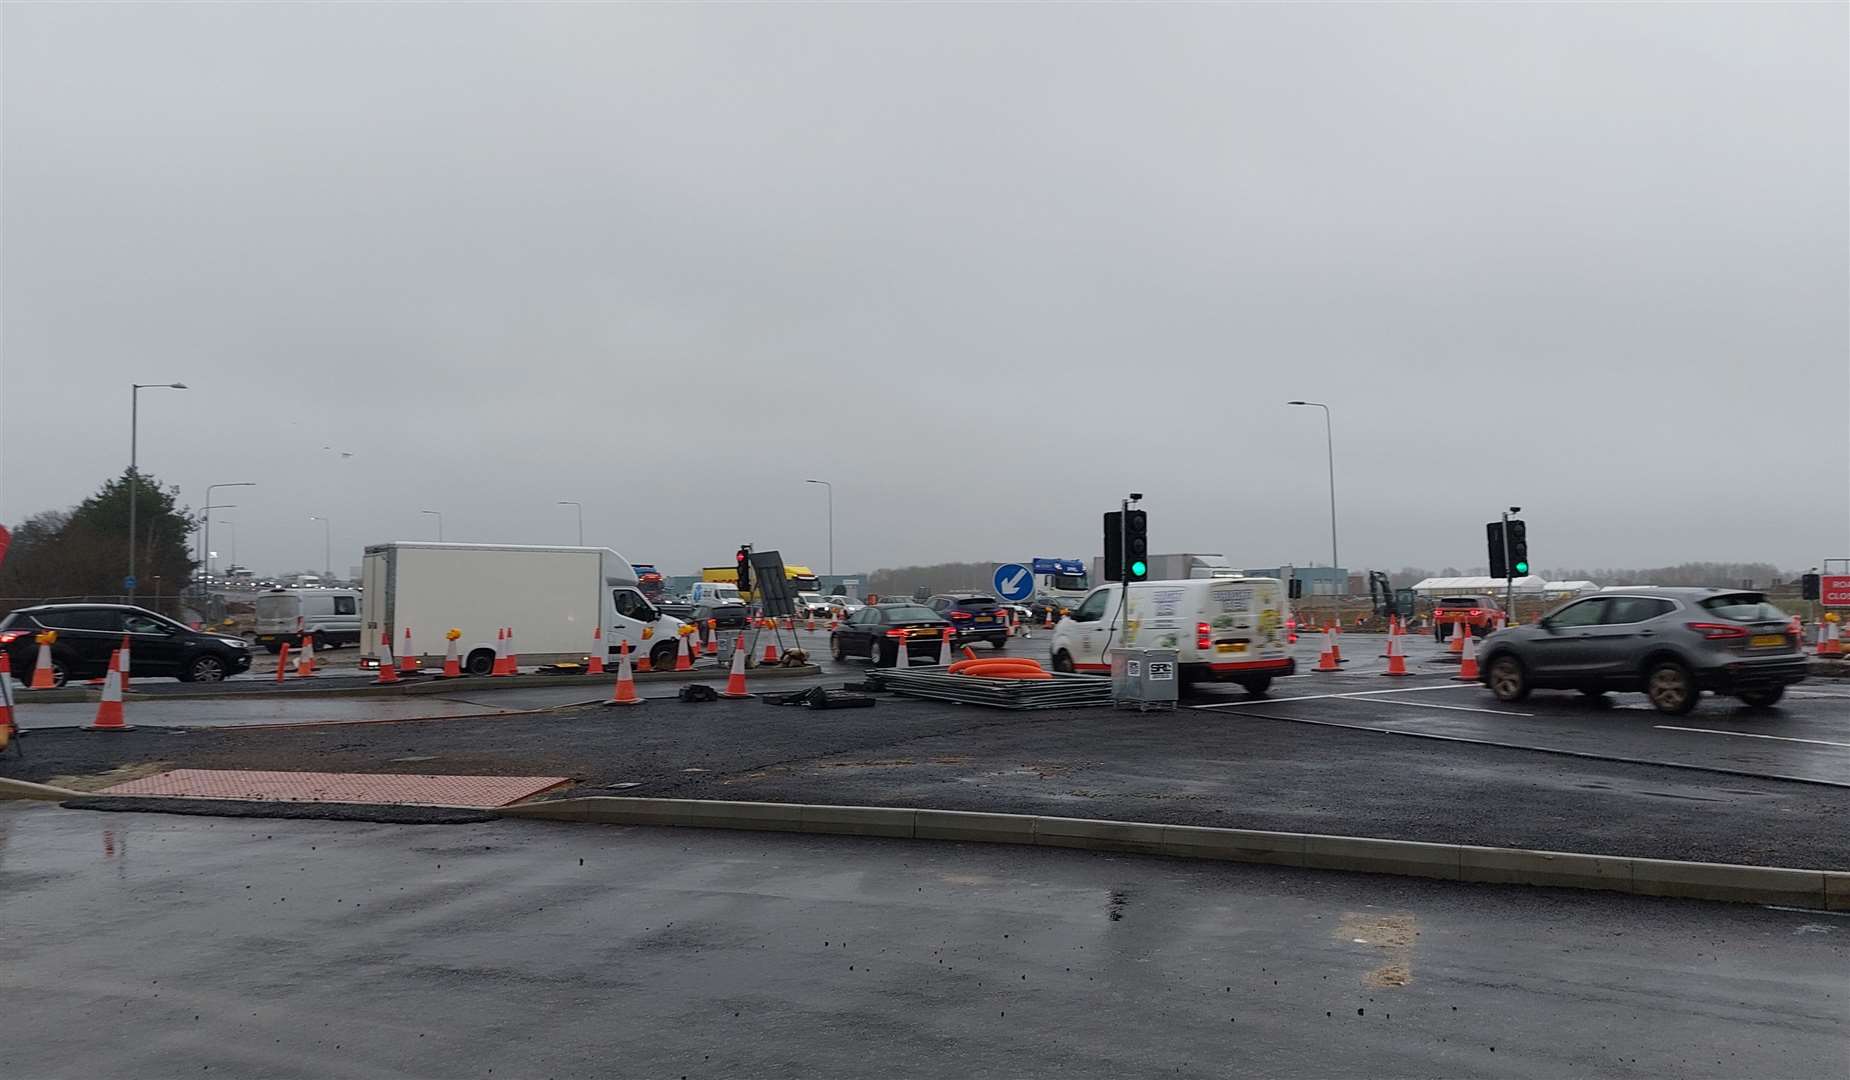 How the former Orbital Park roundabout junction currently looks